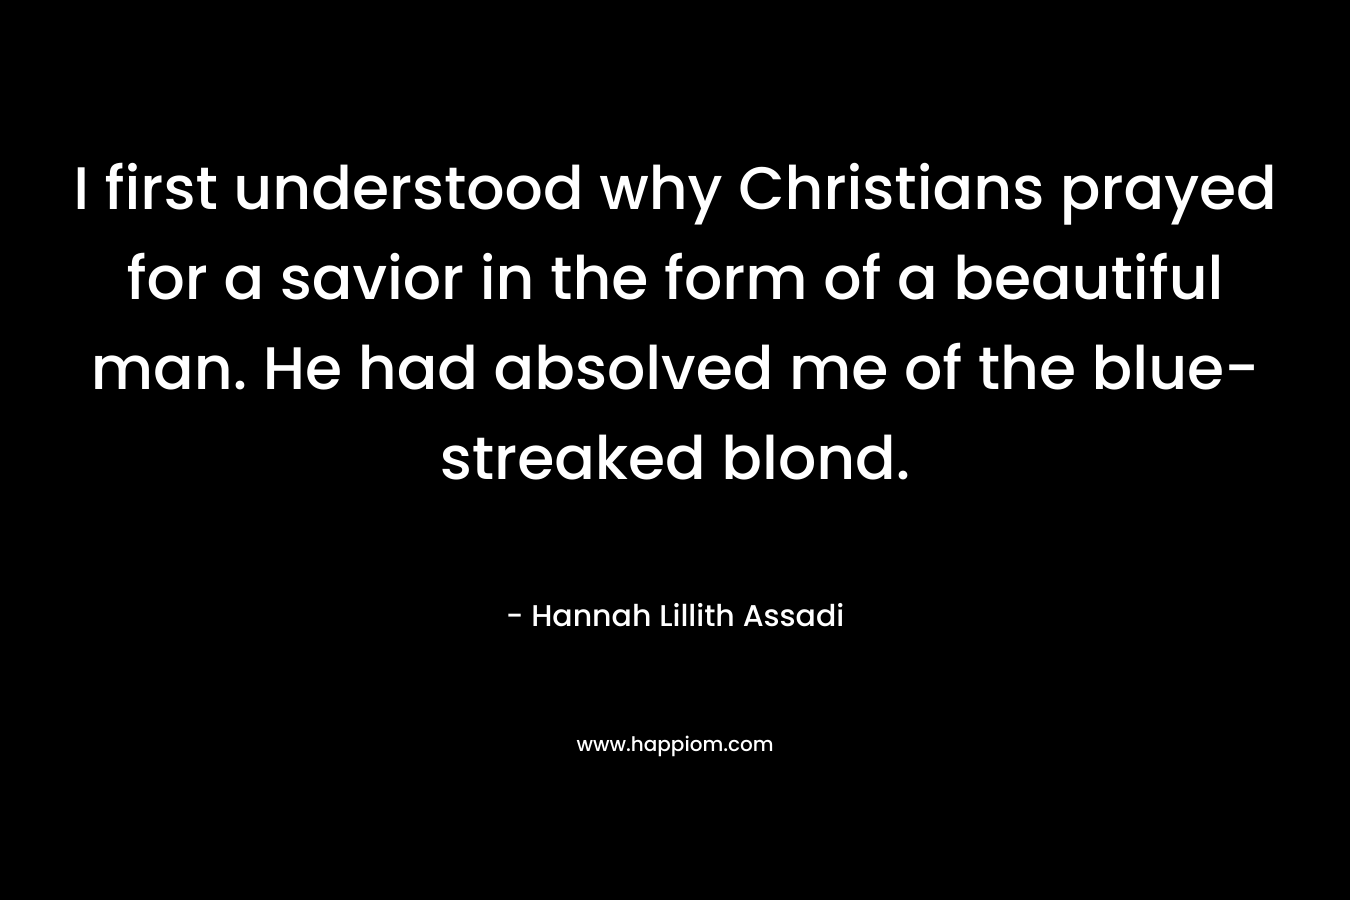 I first understood why Christians prayed for a savior in the form of a beautiful man. He had absolved me of the blue-streaked blond. – Hannah Lillith Assadi